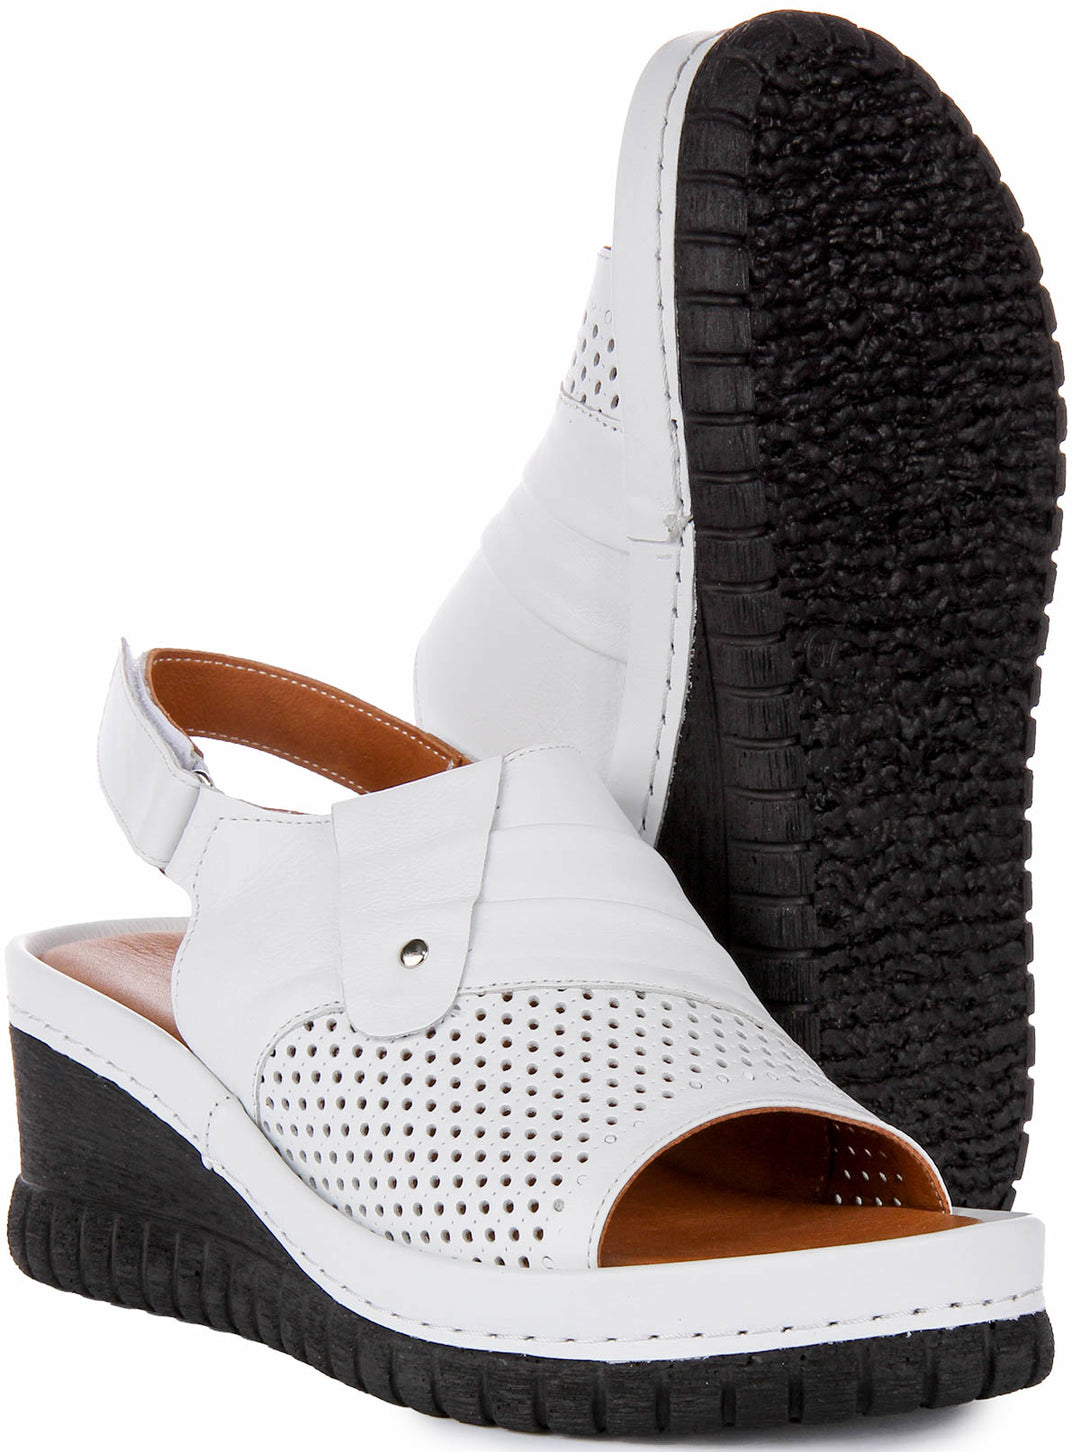 Gal Wedge Sandals In White Leather